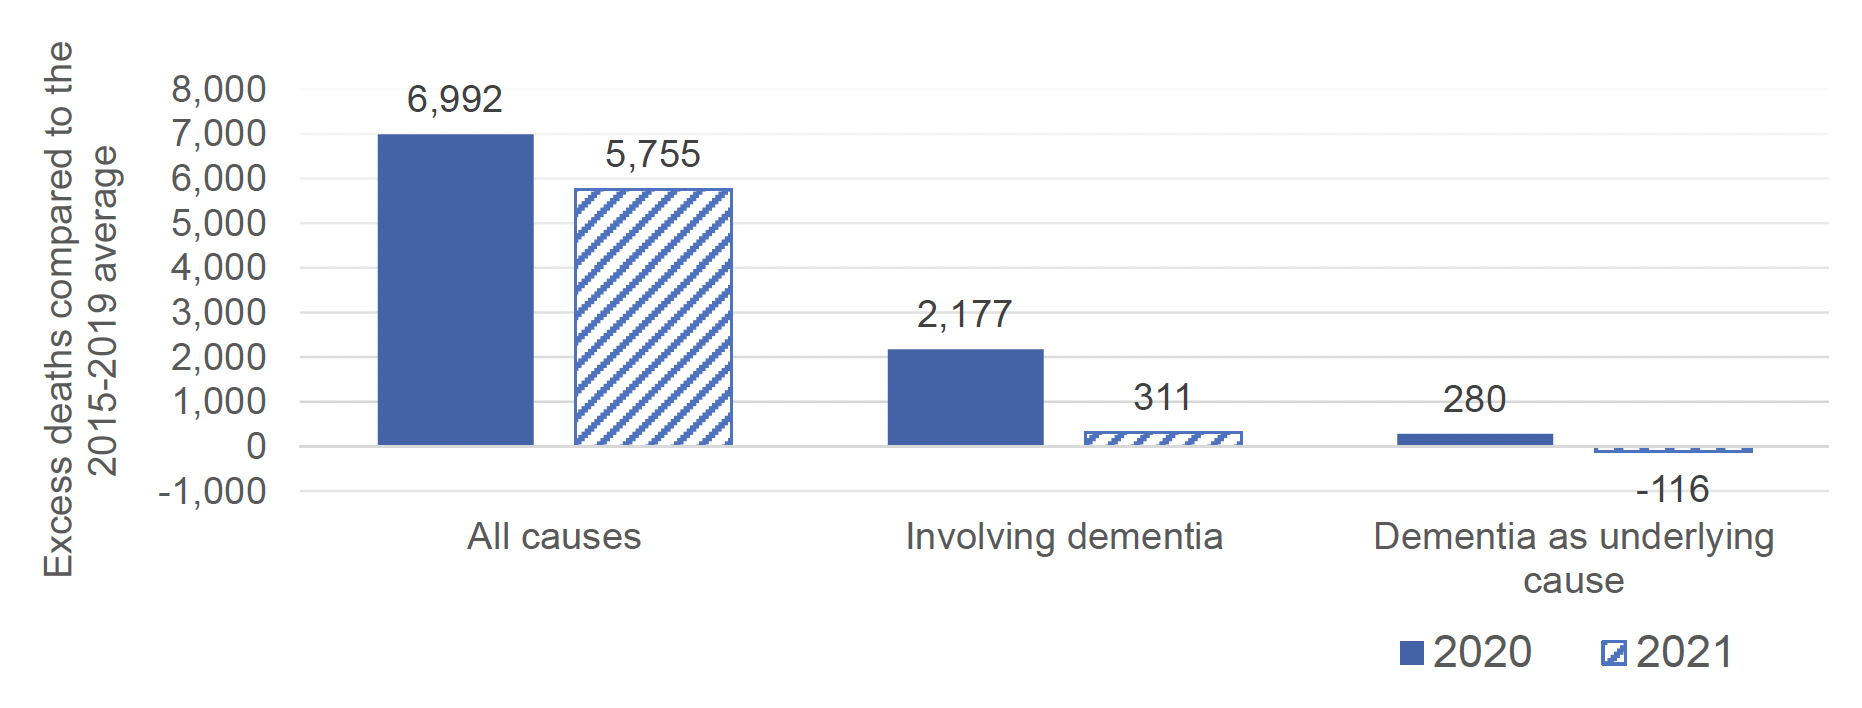 Figure 4: Column chart displaying the number of excess deaths in 2020 (solid blue) and 2021 (patterned blue) in Scotland compared to the 2015-2019 average; from all causes (left), involving dementia (middle) and dementia as the underlying cause (right).